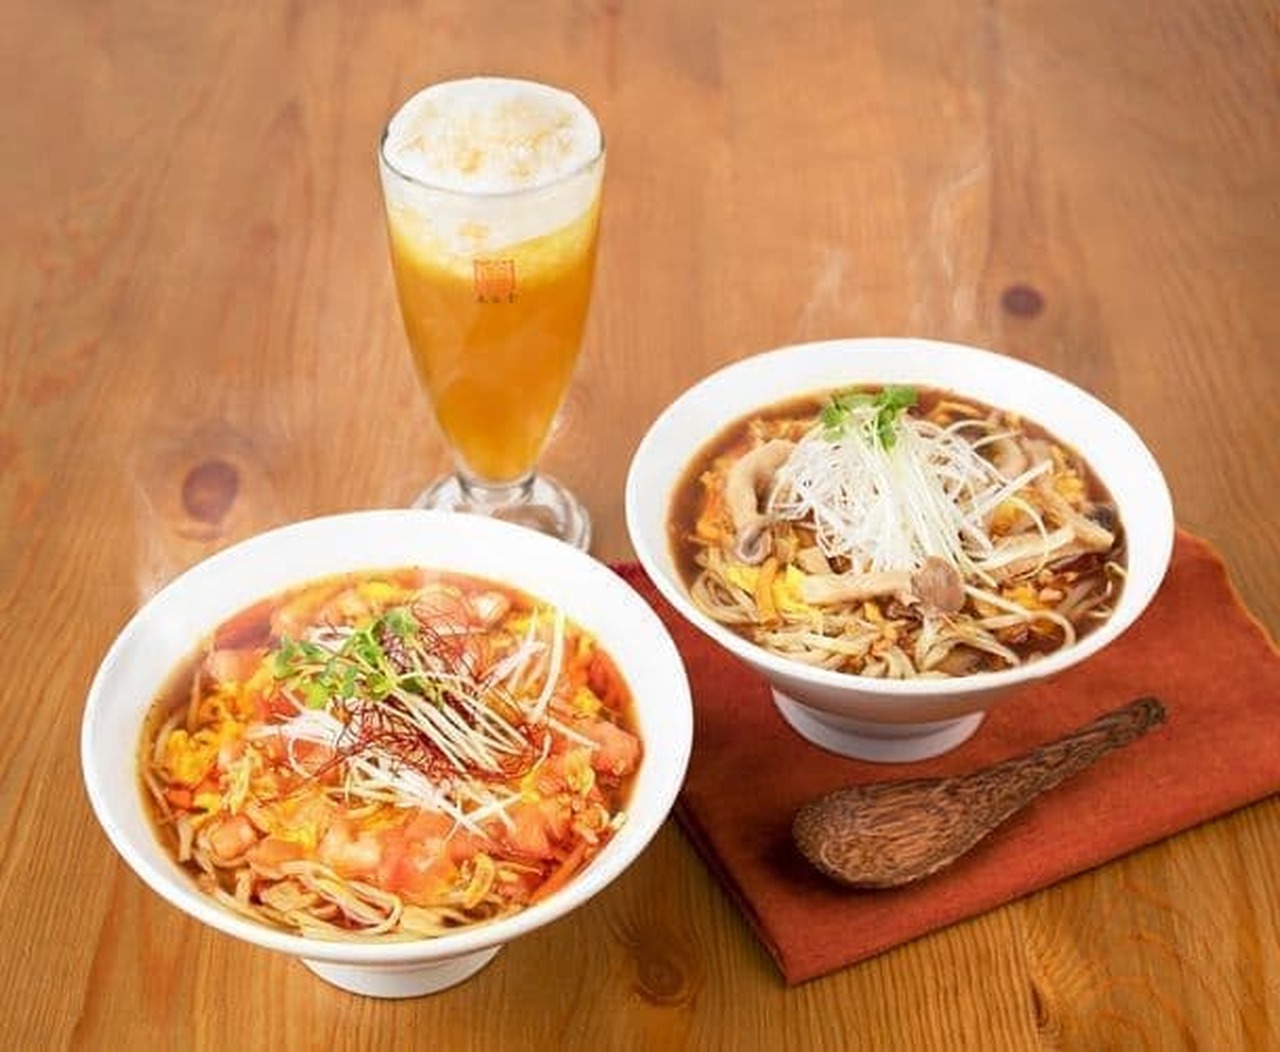 Chun Shui Tang "Hot and sour soup noodles" "Spicy tomato hot and sour soup noodles"